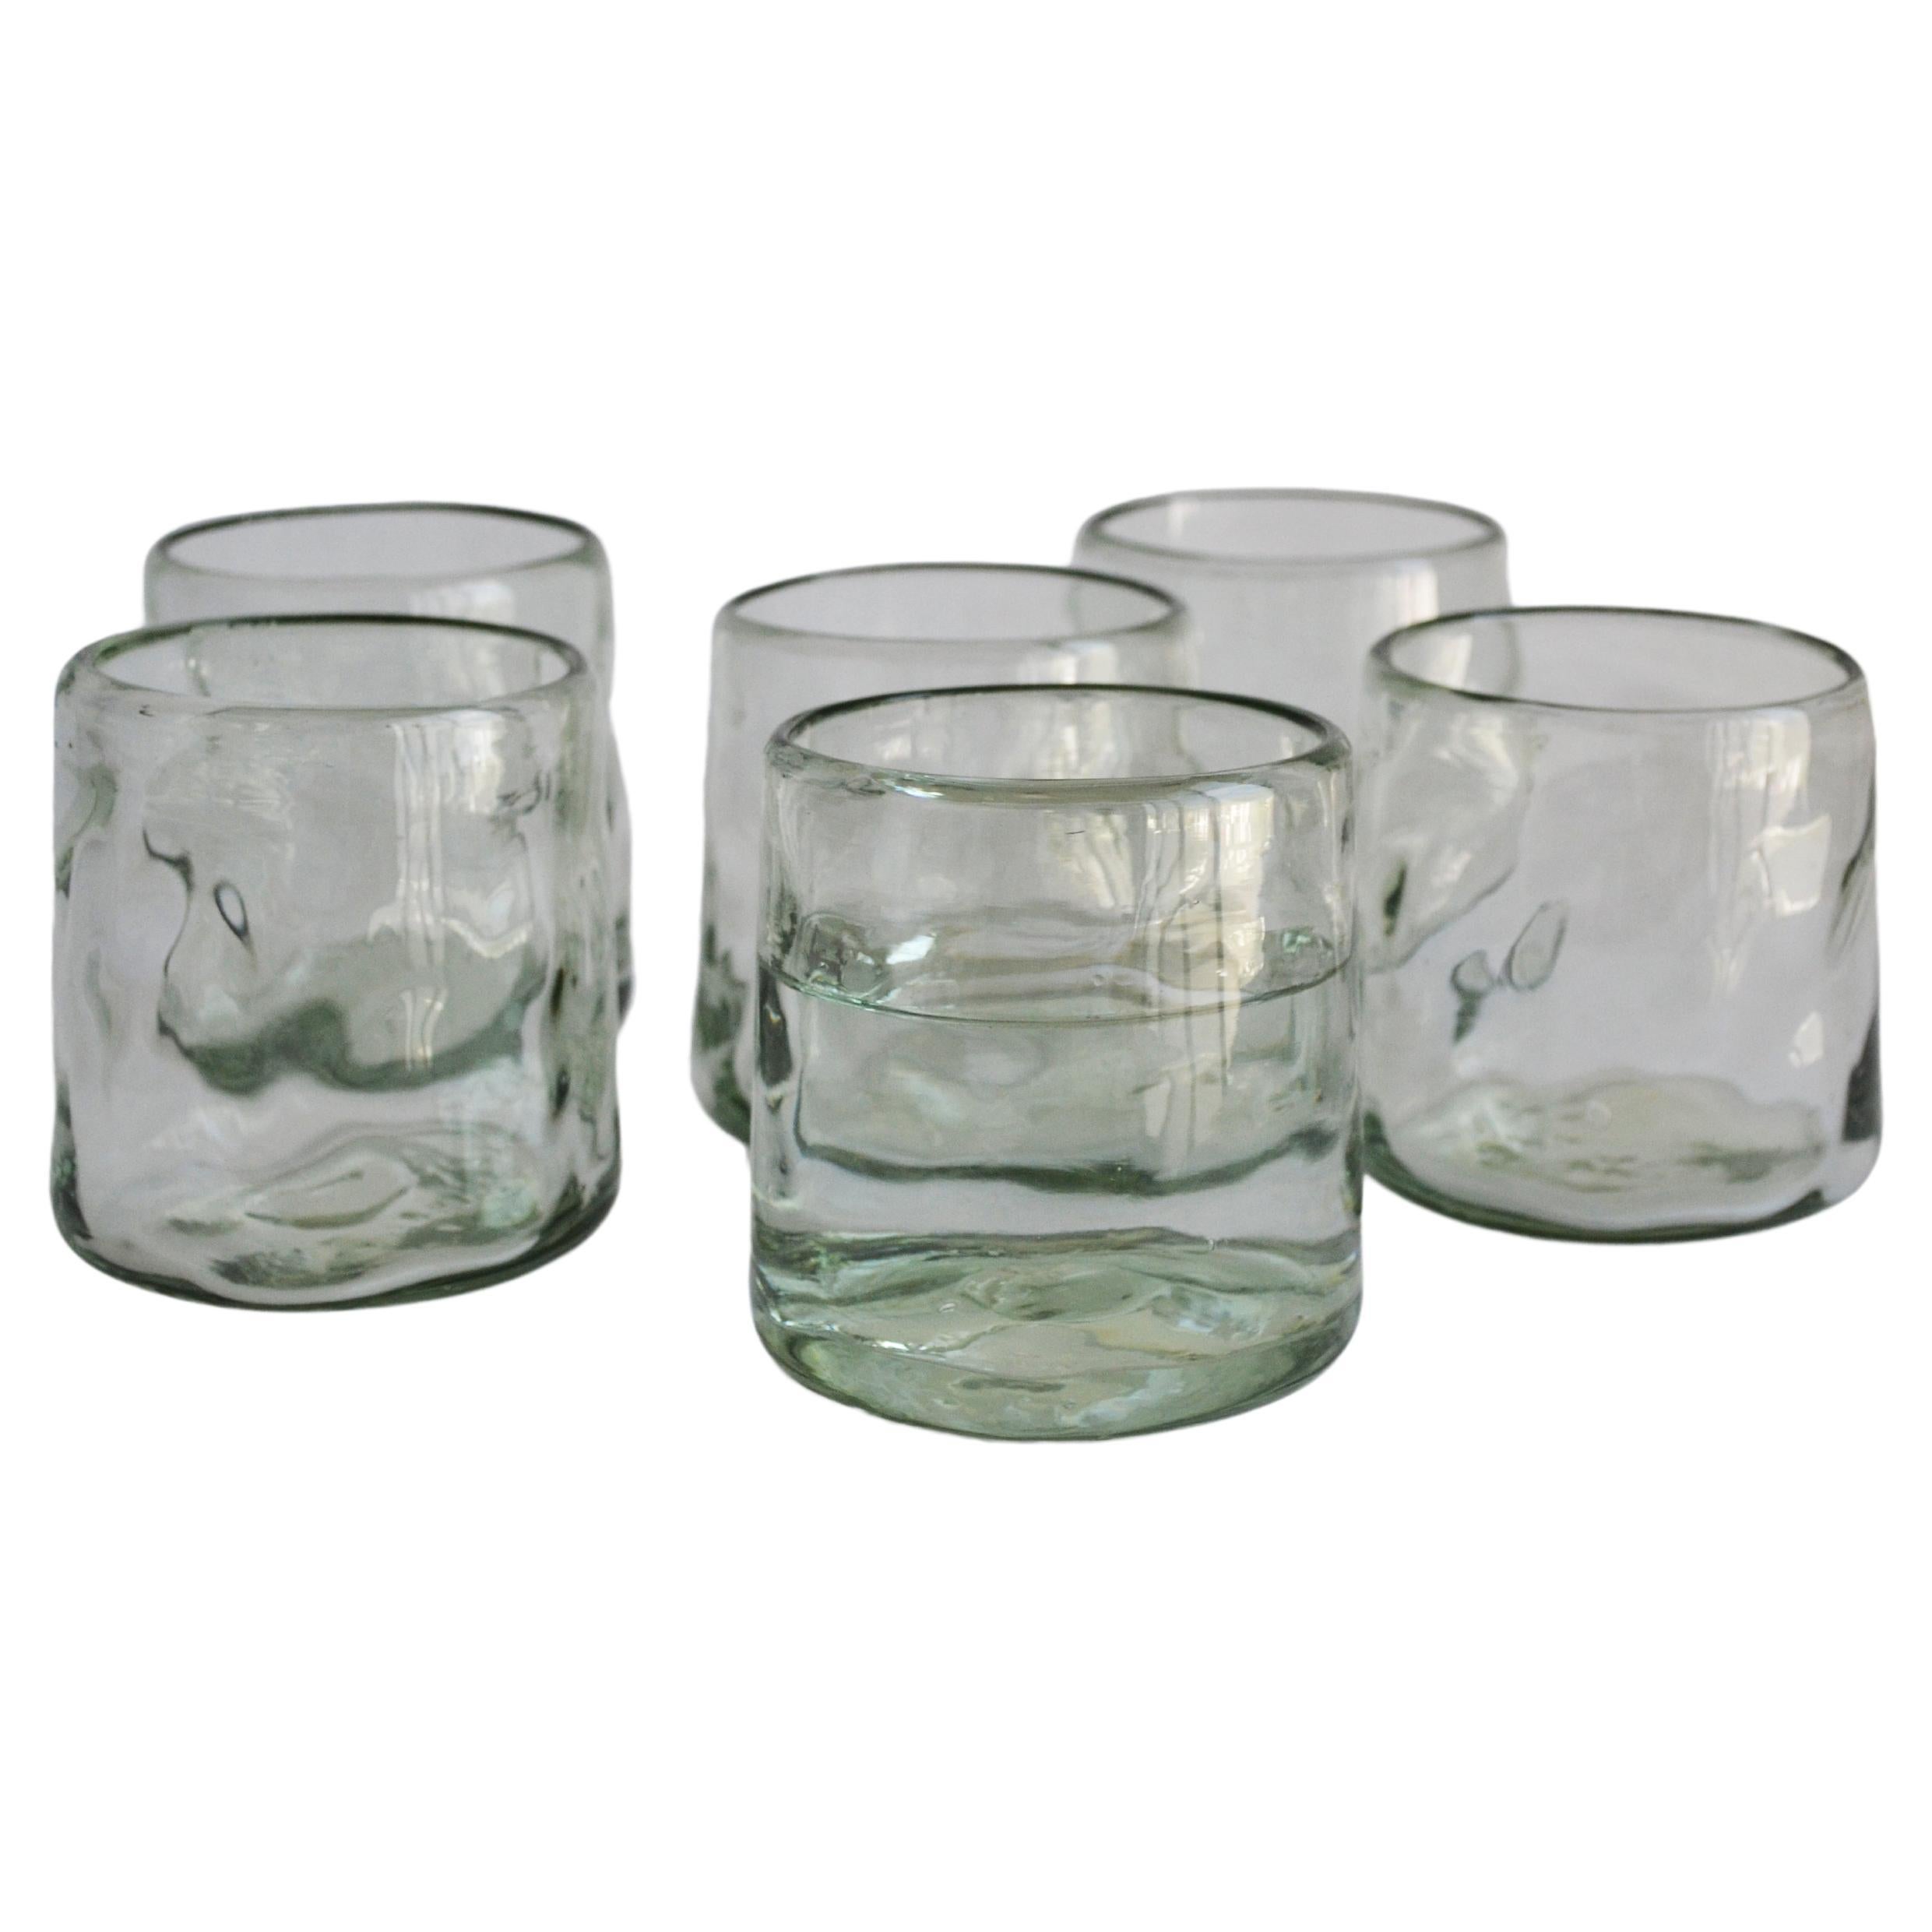 Island Chic Hand-Woven Lattice Short Drinking Glass at Twisted